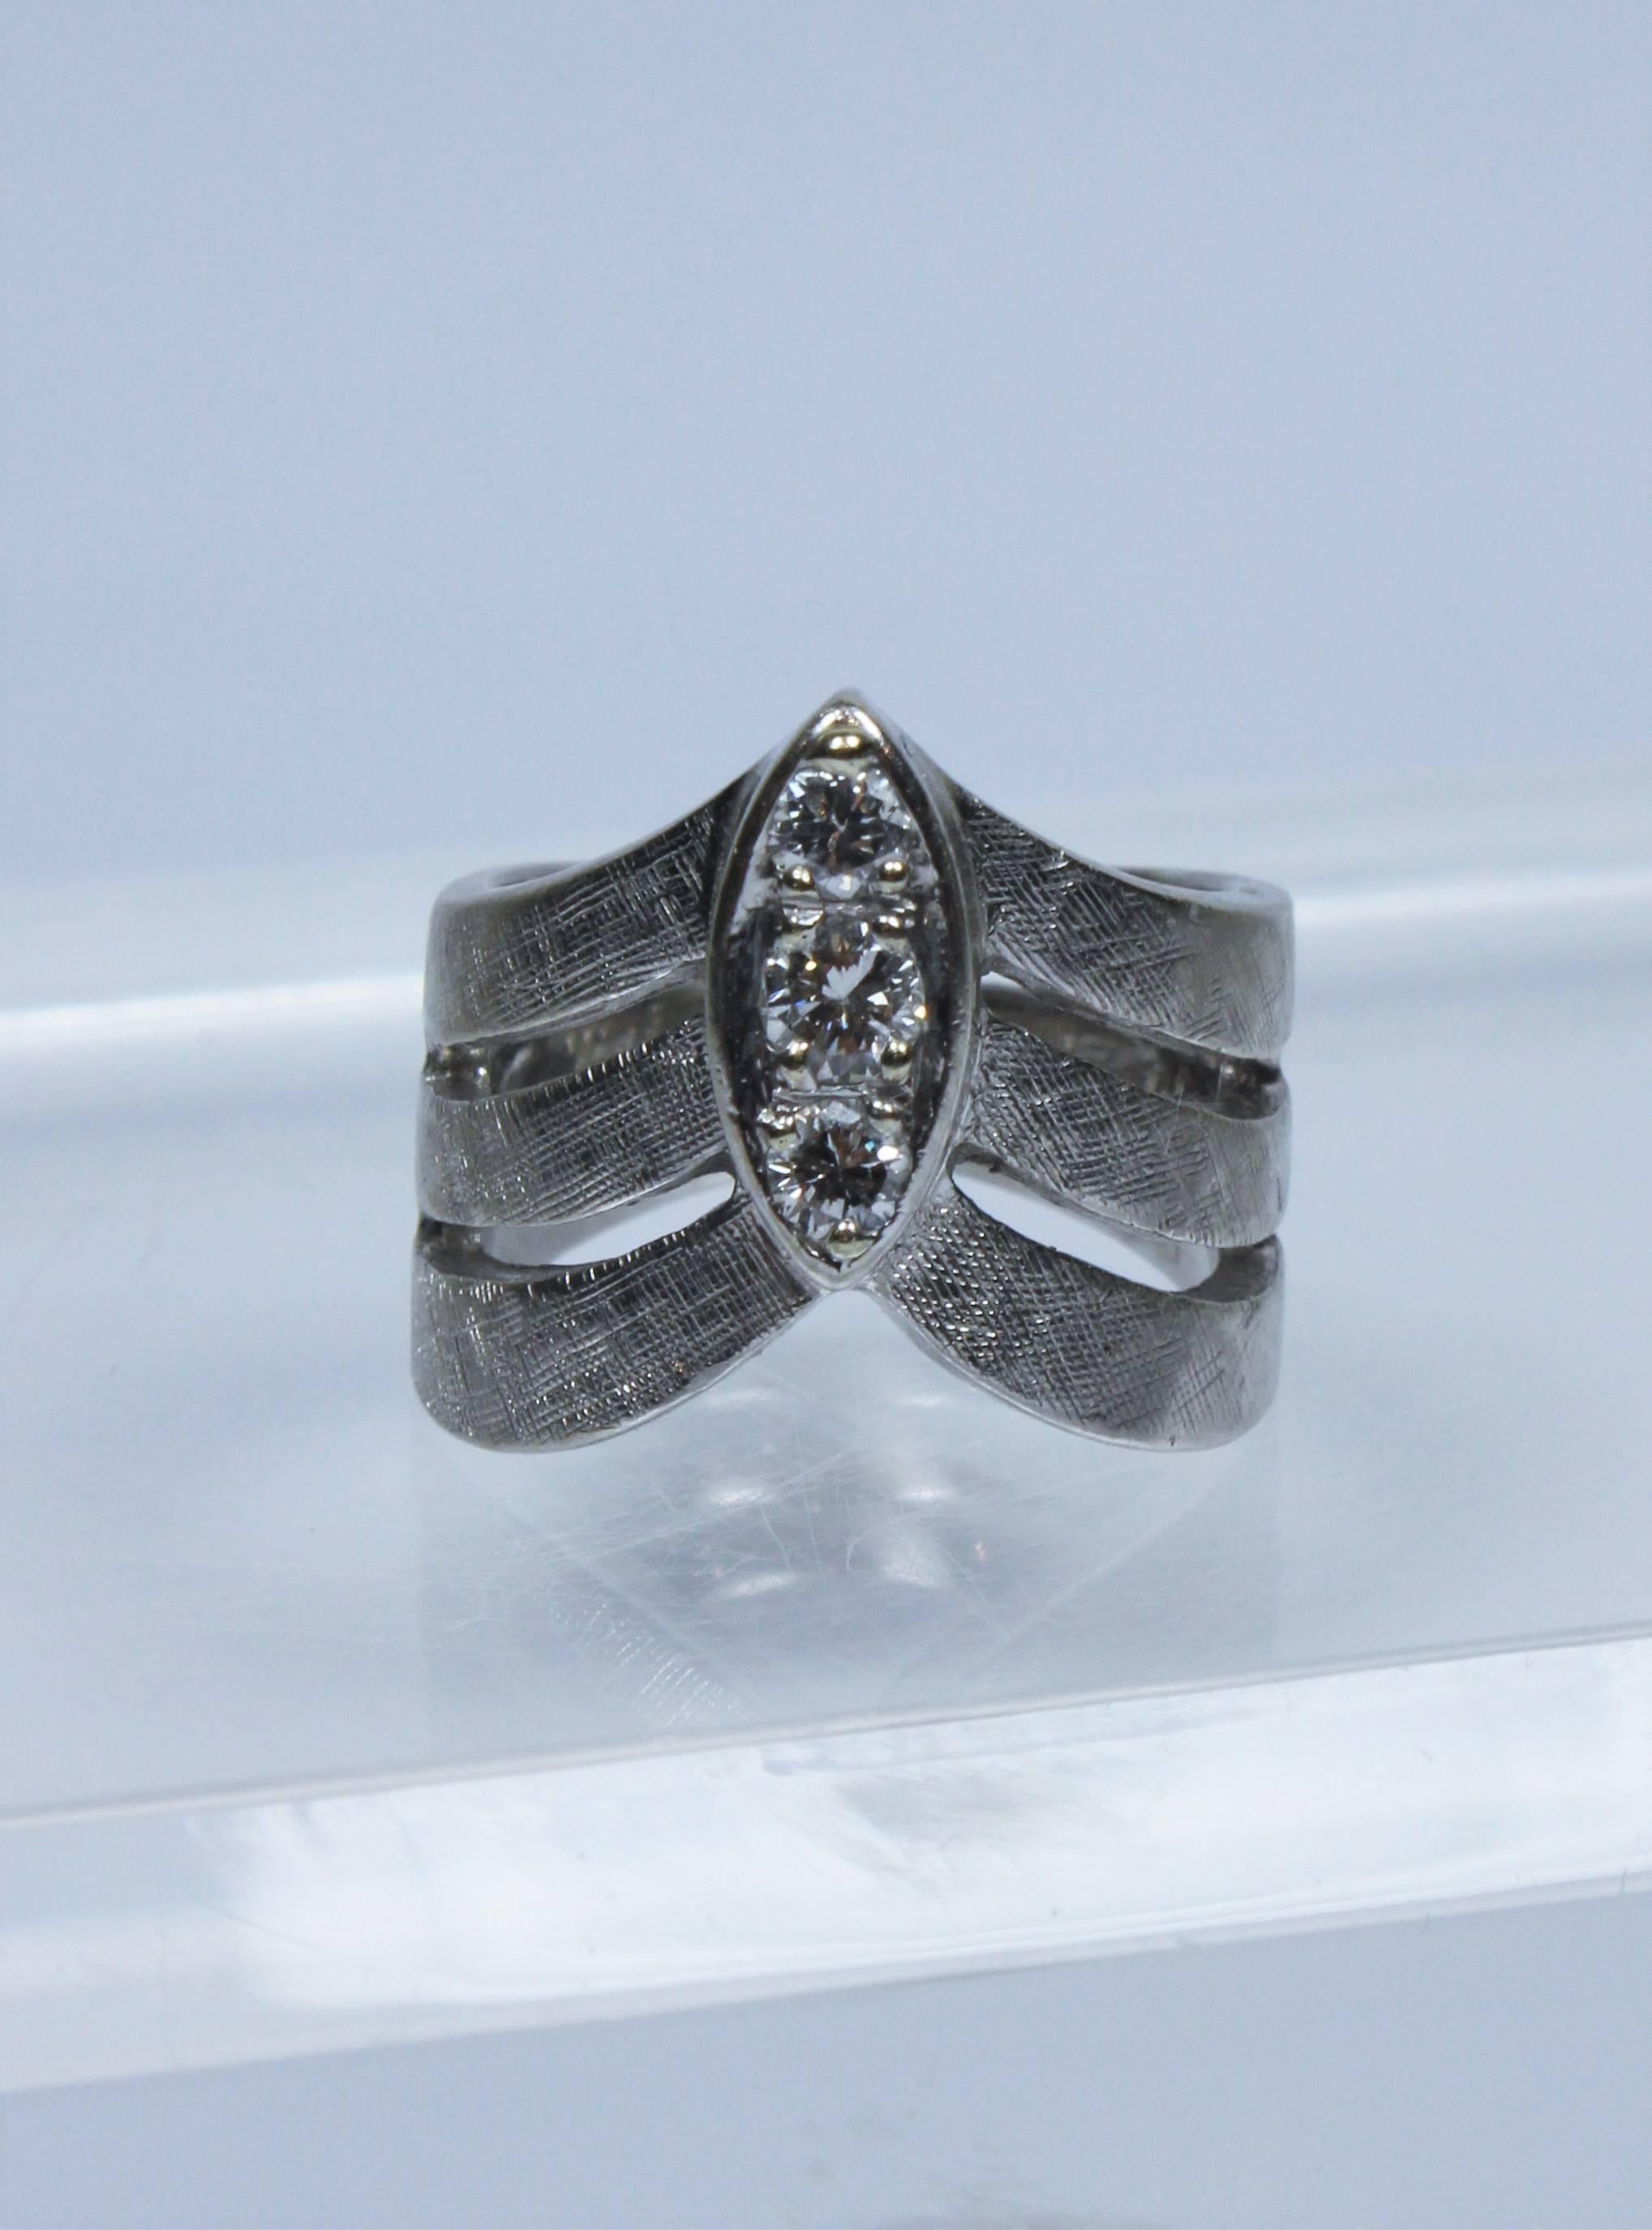 This vintage ring is composed of a textured 14KT white gold featuring three center diamonds and a pointed chevron design. 

Specs: 
14KT White Gold 
Height 3/8